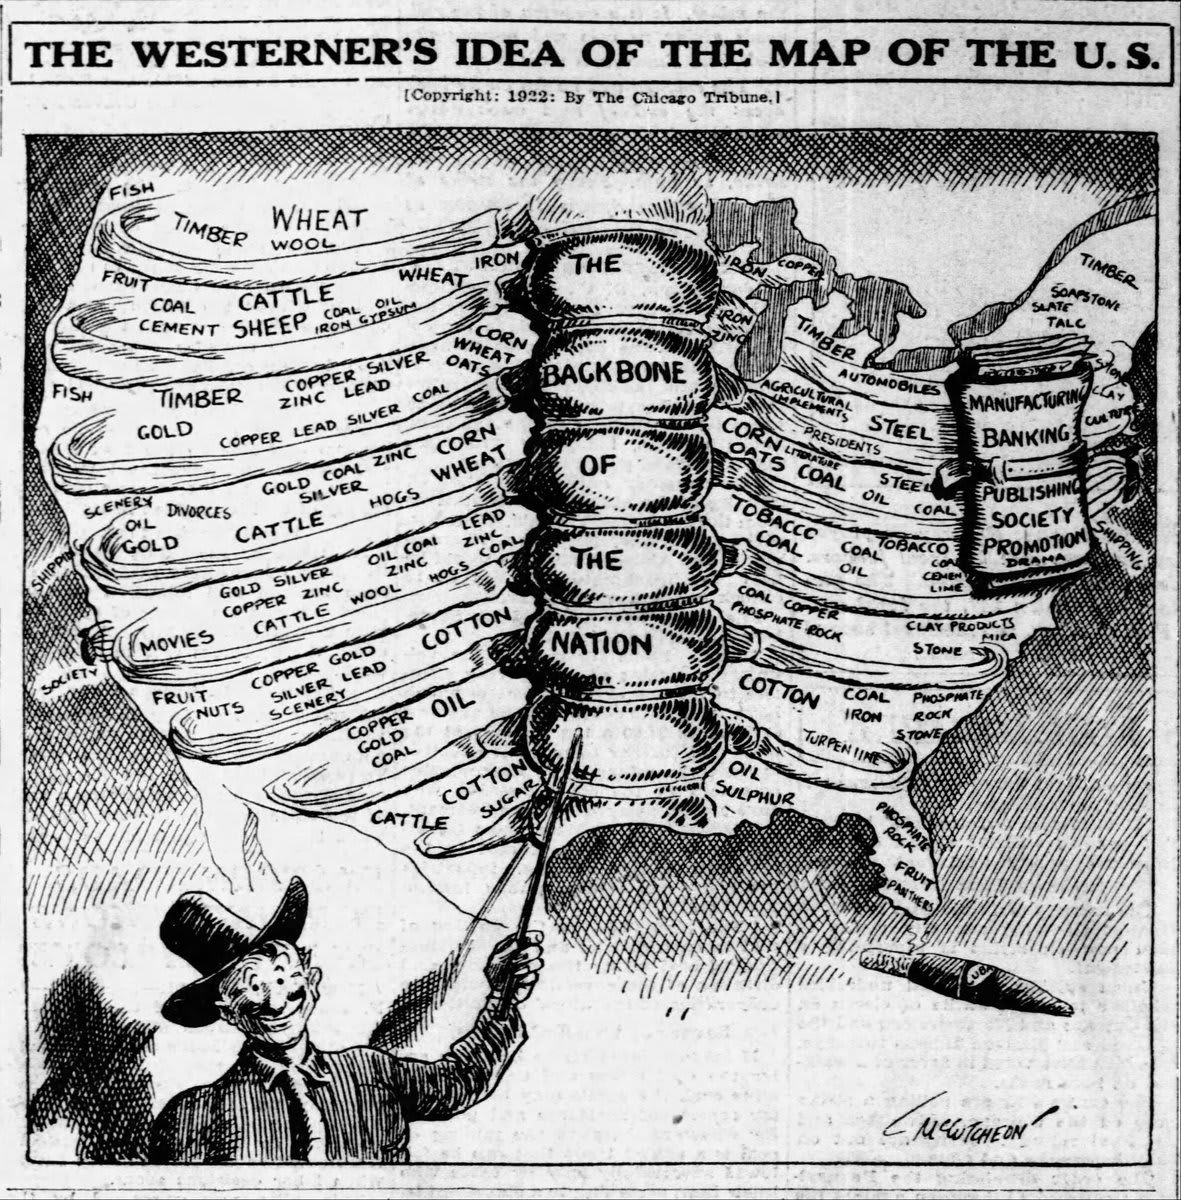 “The Westerner’s Idea of the Map of the US,” from the Chicago Tribune.